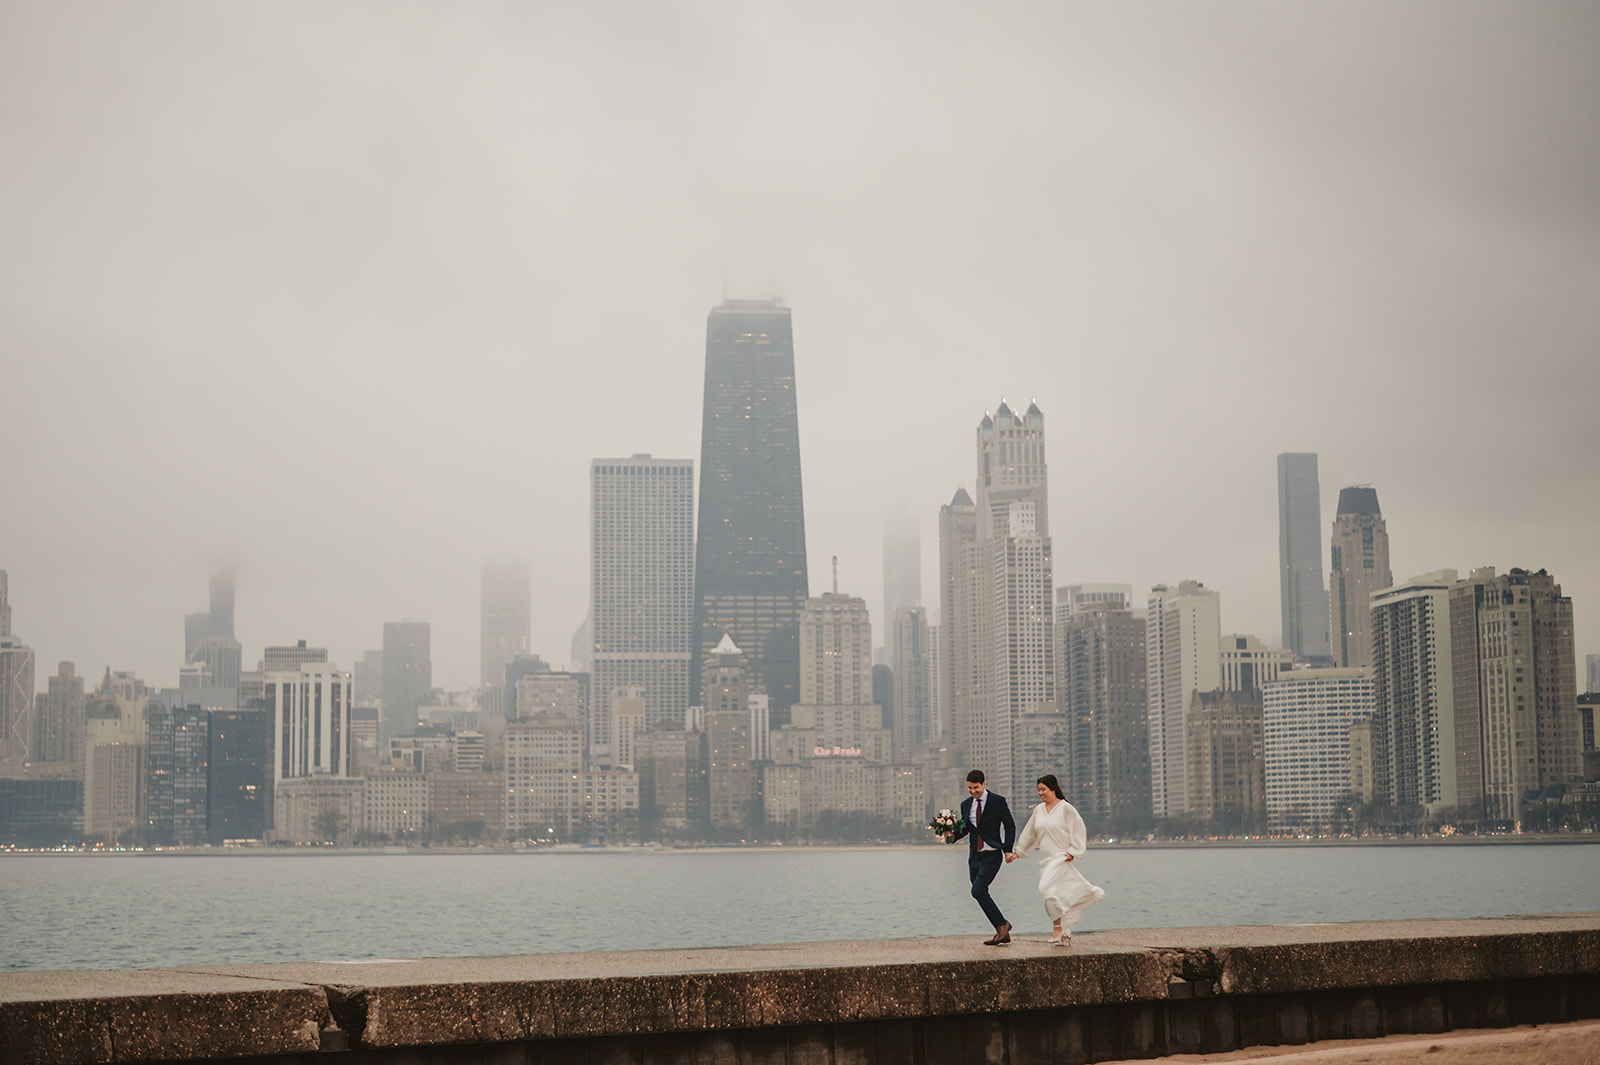 Intimate rainy day Chicago elopement wedding photography - Skyline over lake Michigan, couple walking on the beach